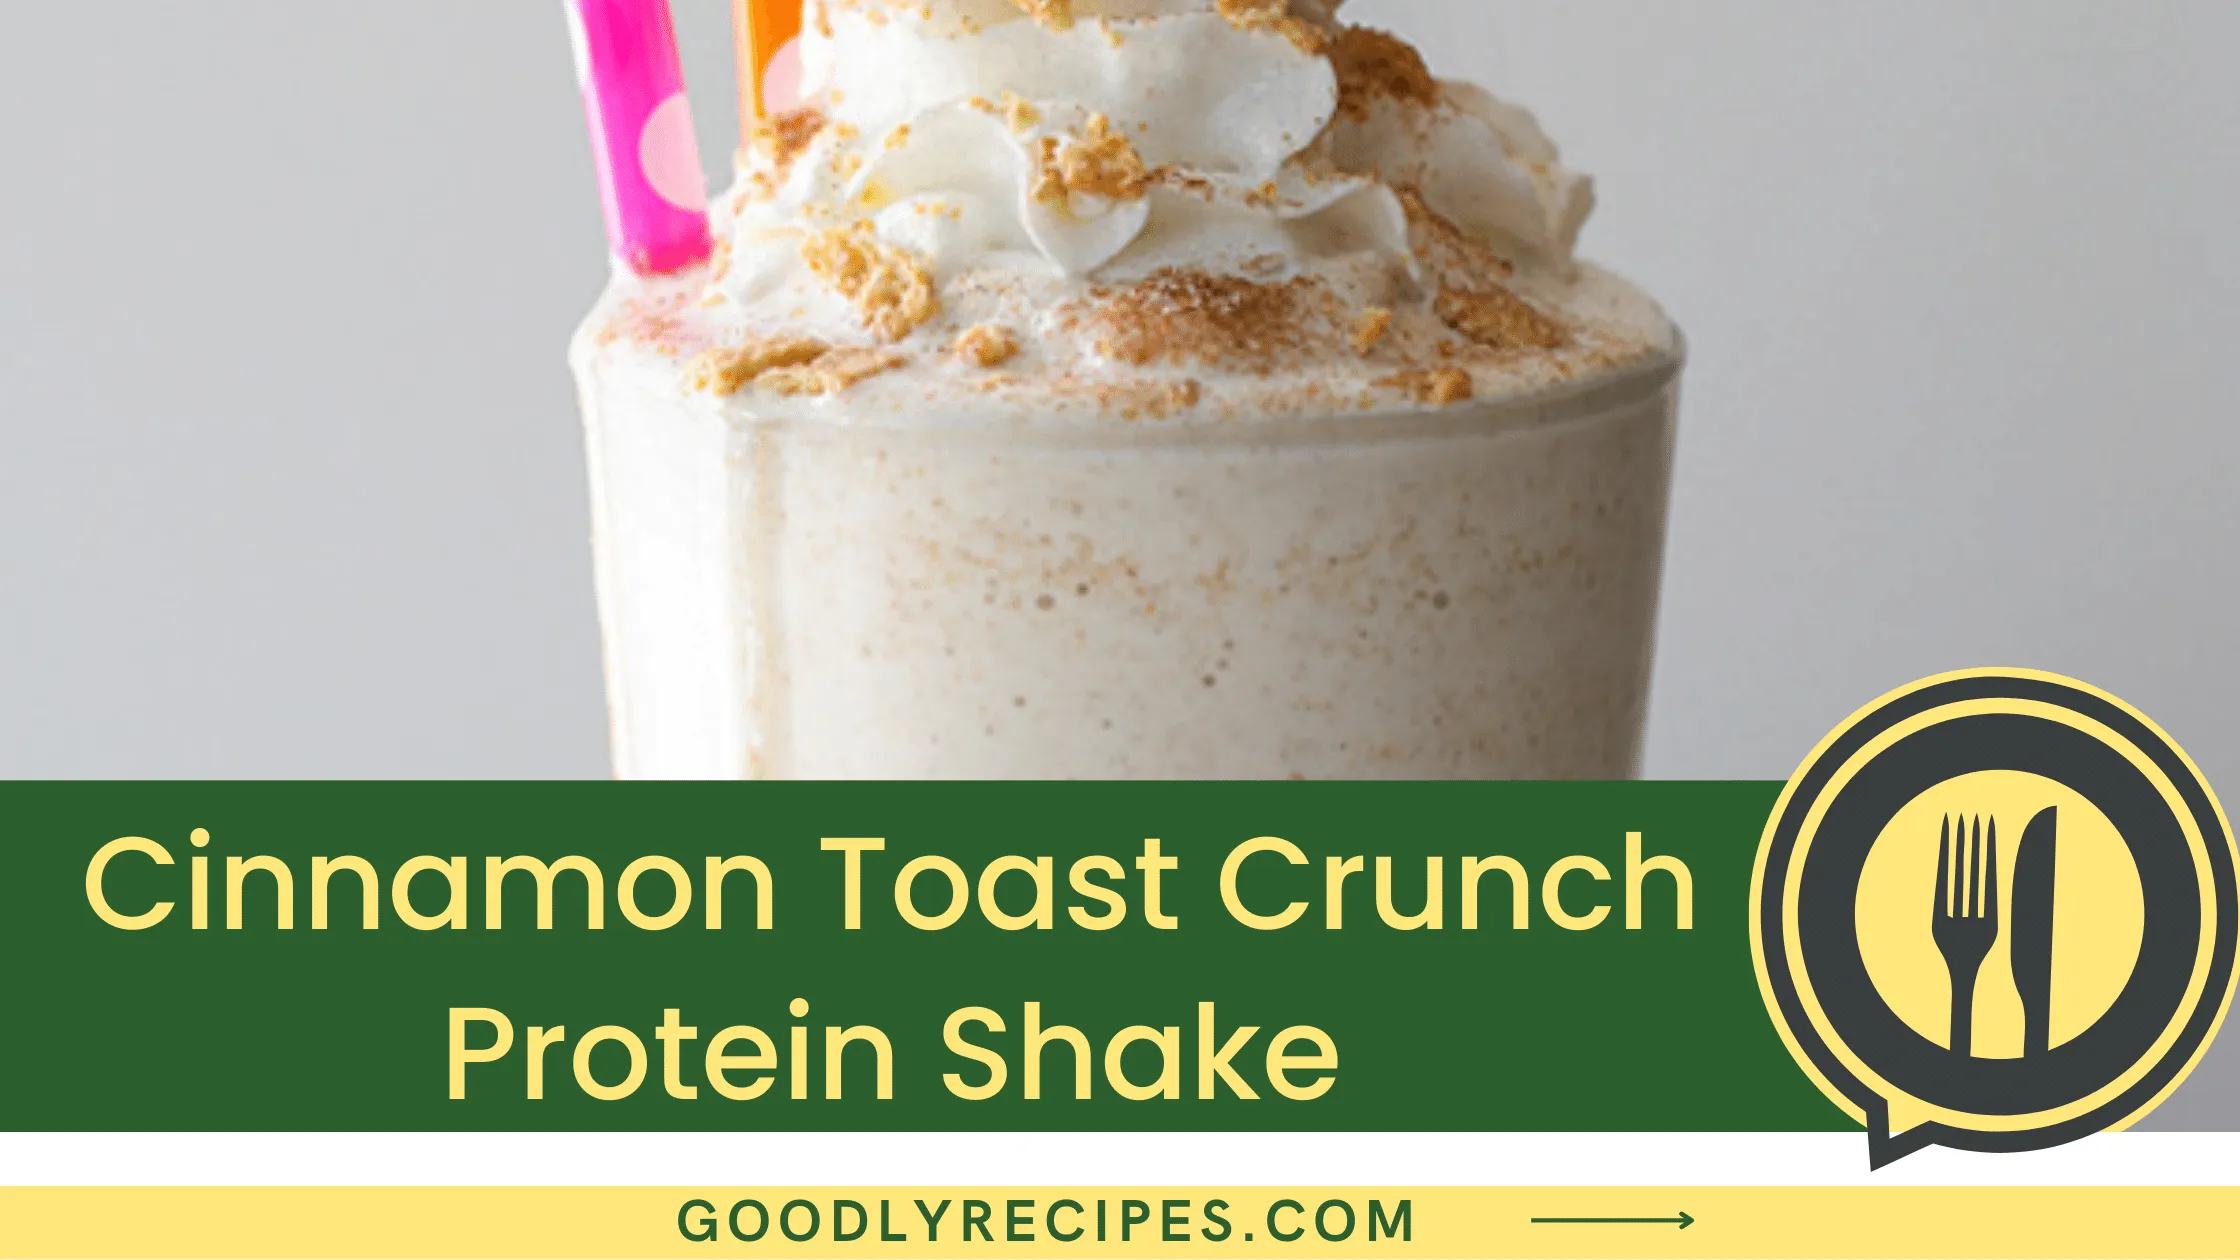 Cinnamon Toast Crunch Protein Shake - For Food Lovers